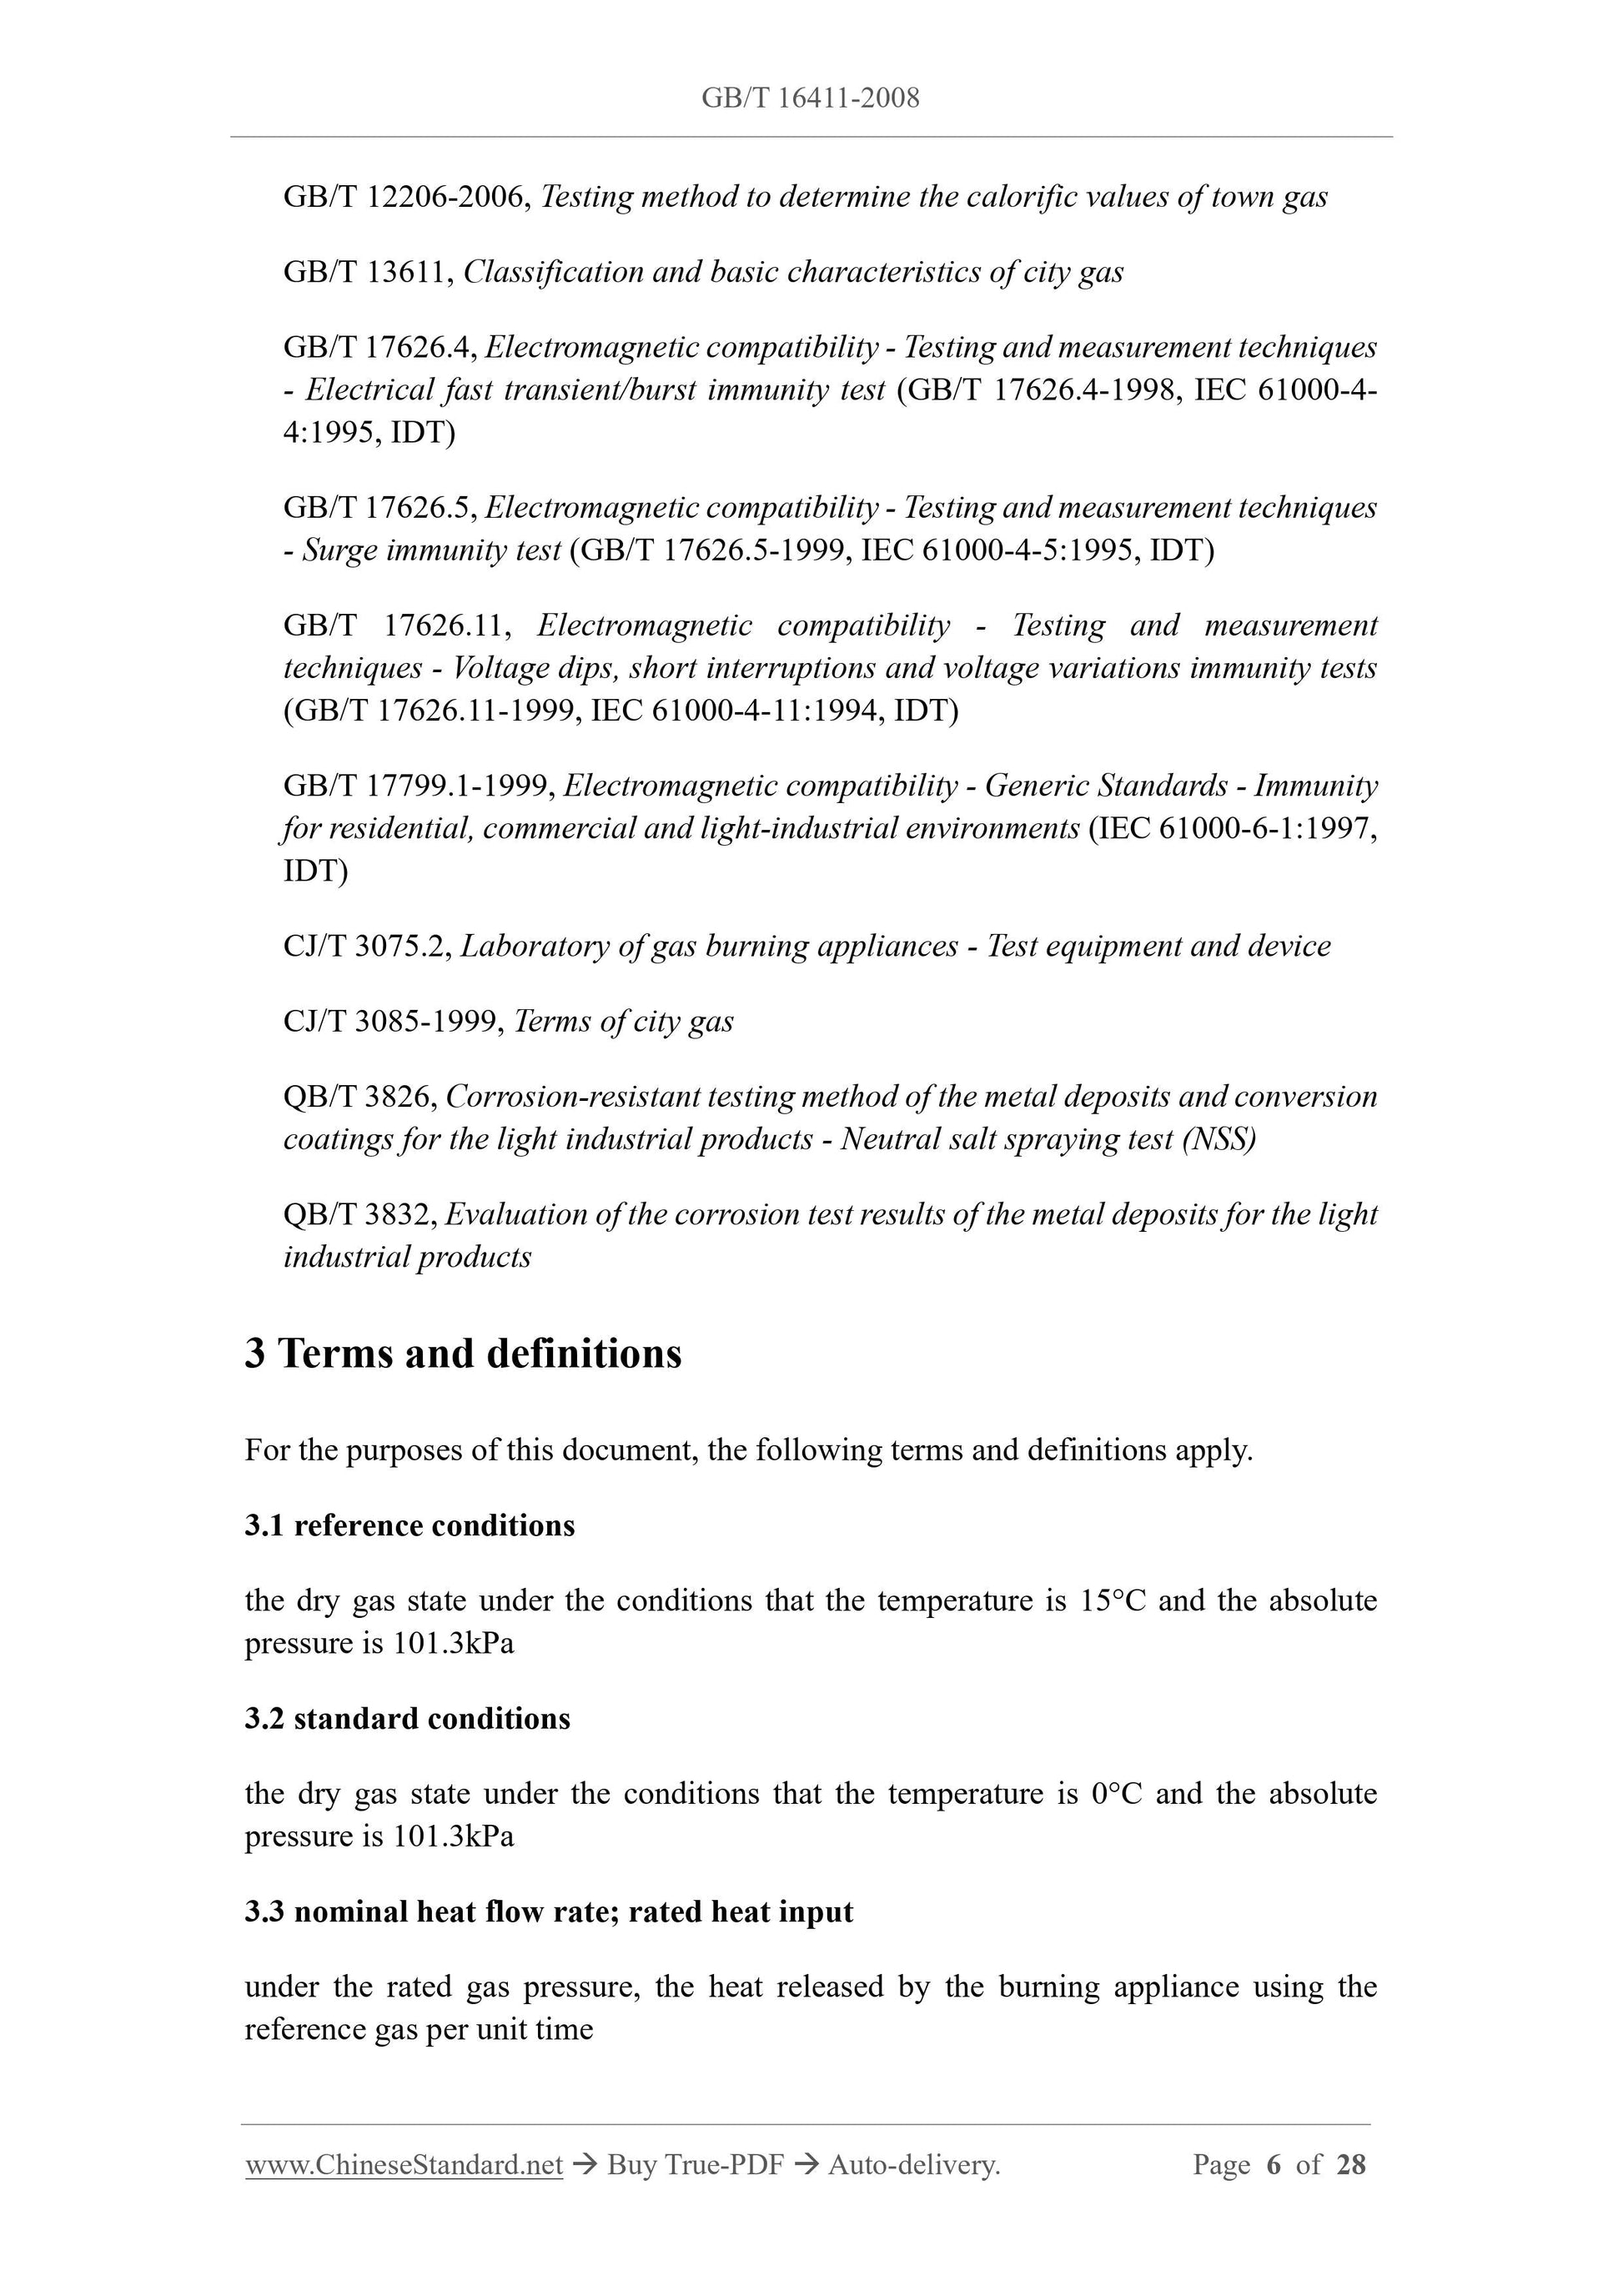 GB/T 16411-2008 Page 4